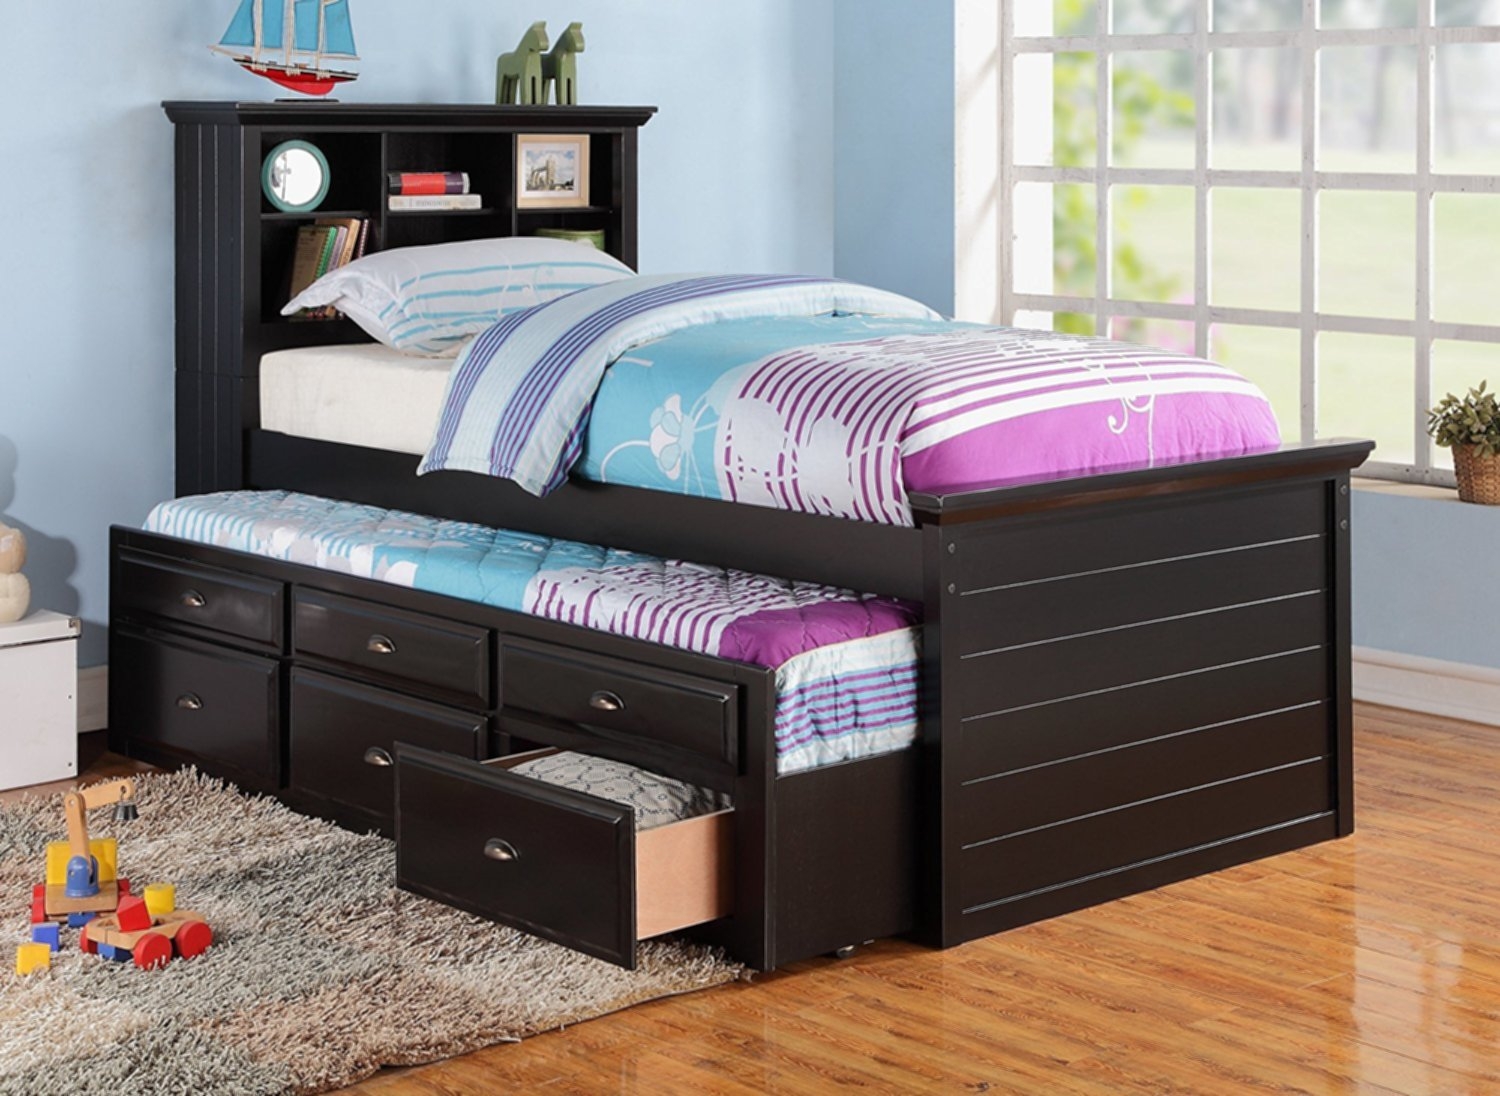 Trundle bed with bookcase headboard